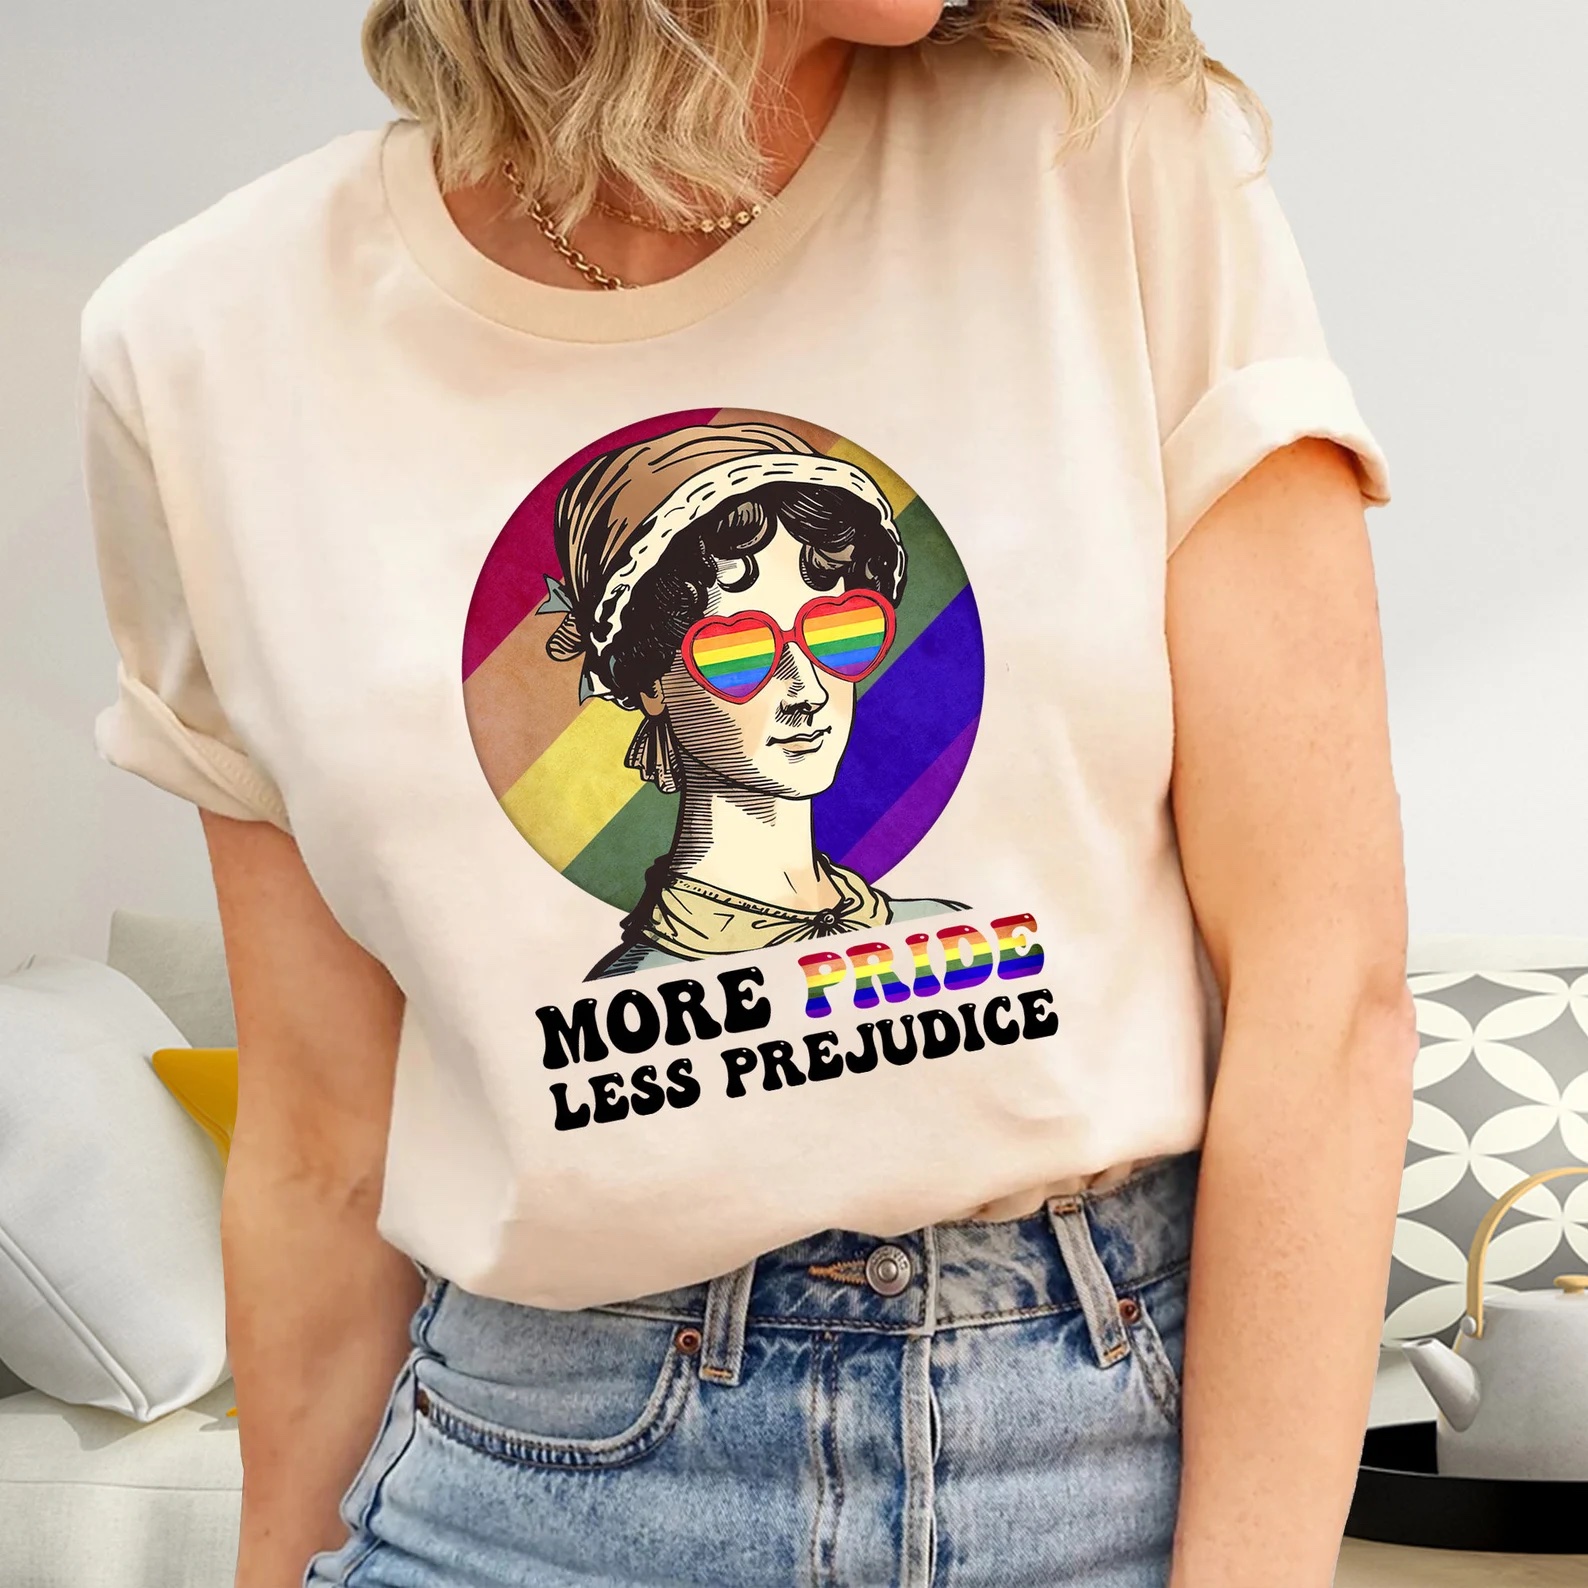 a t-shirt depicting Jane Austen on a rainbow background. She's also wearing rainbow glasses. The words "More Pride Less Prejudice" are below her